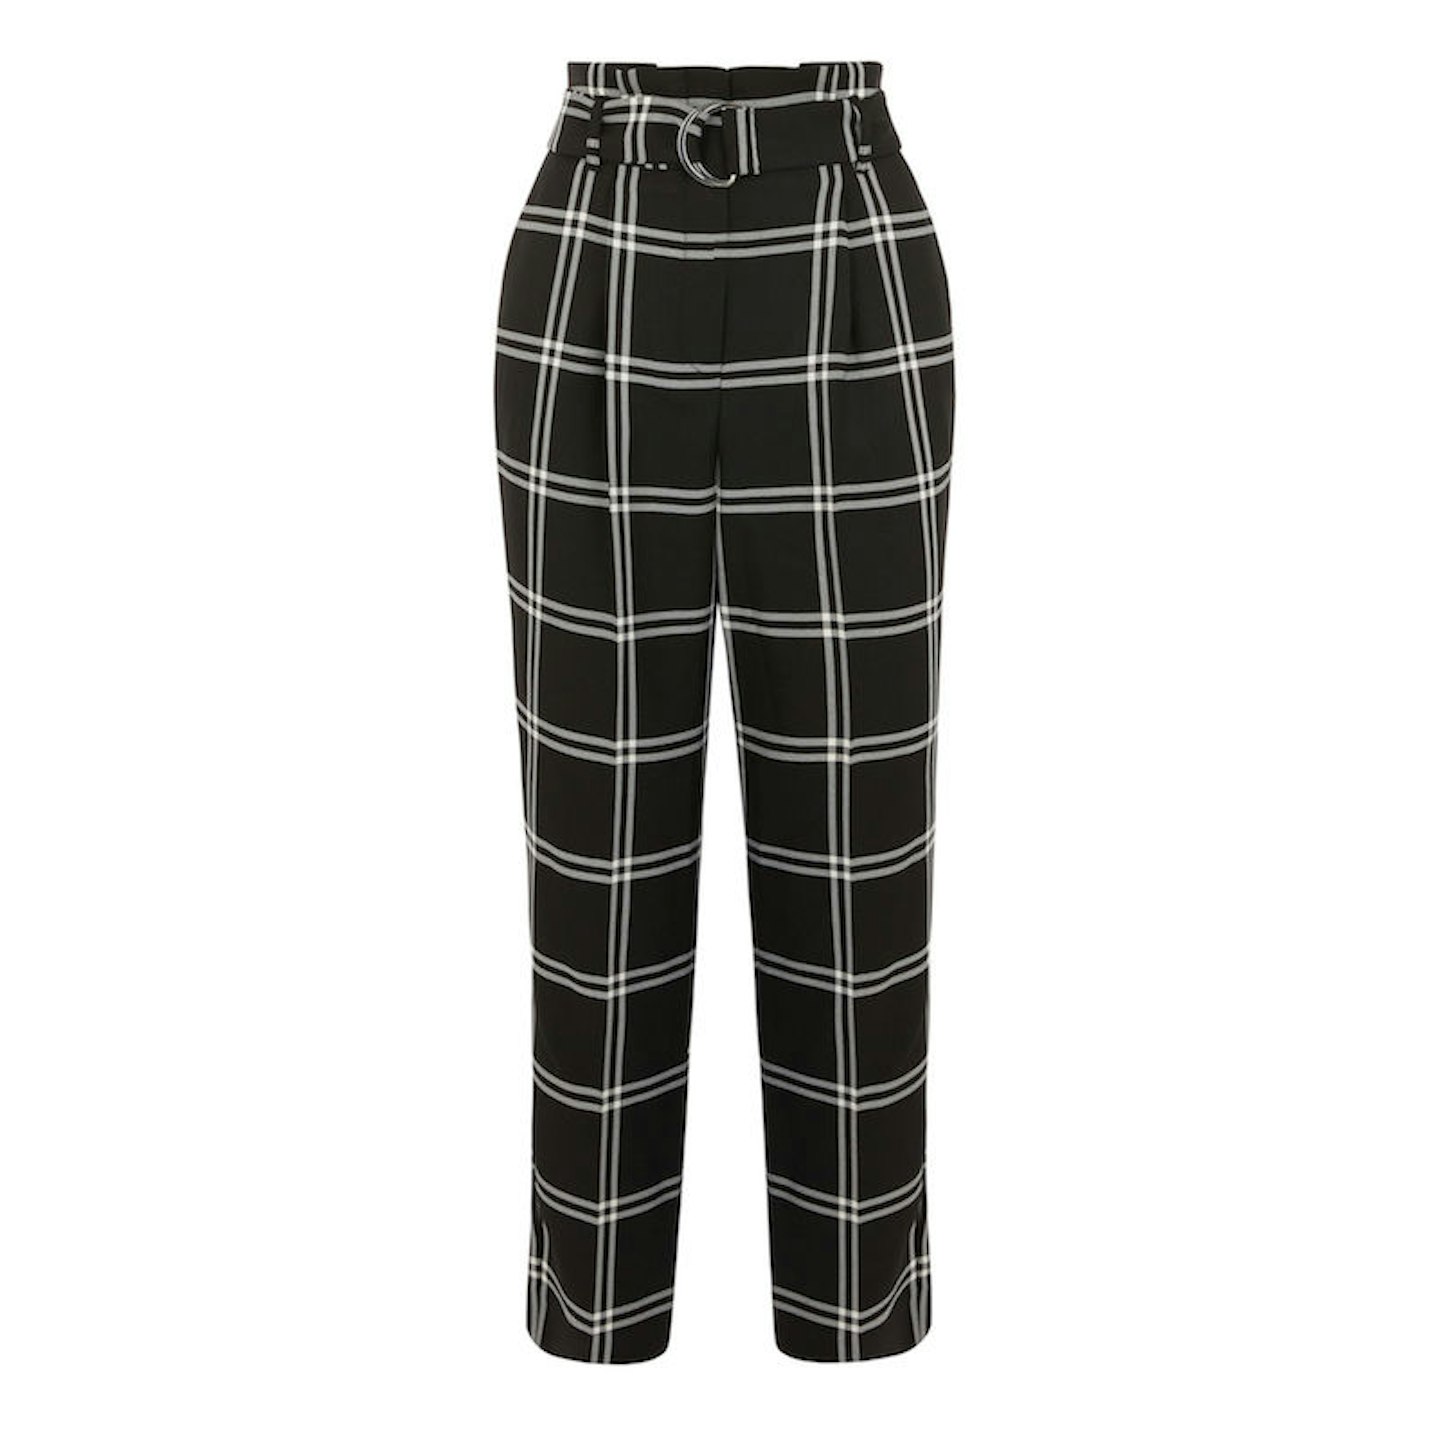 Warehouse, Large Check Cigarette Trousers, £39